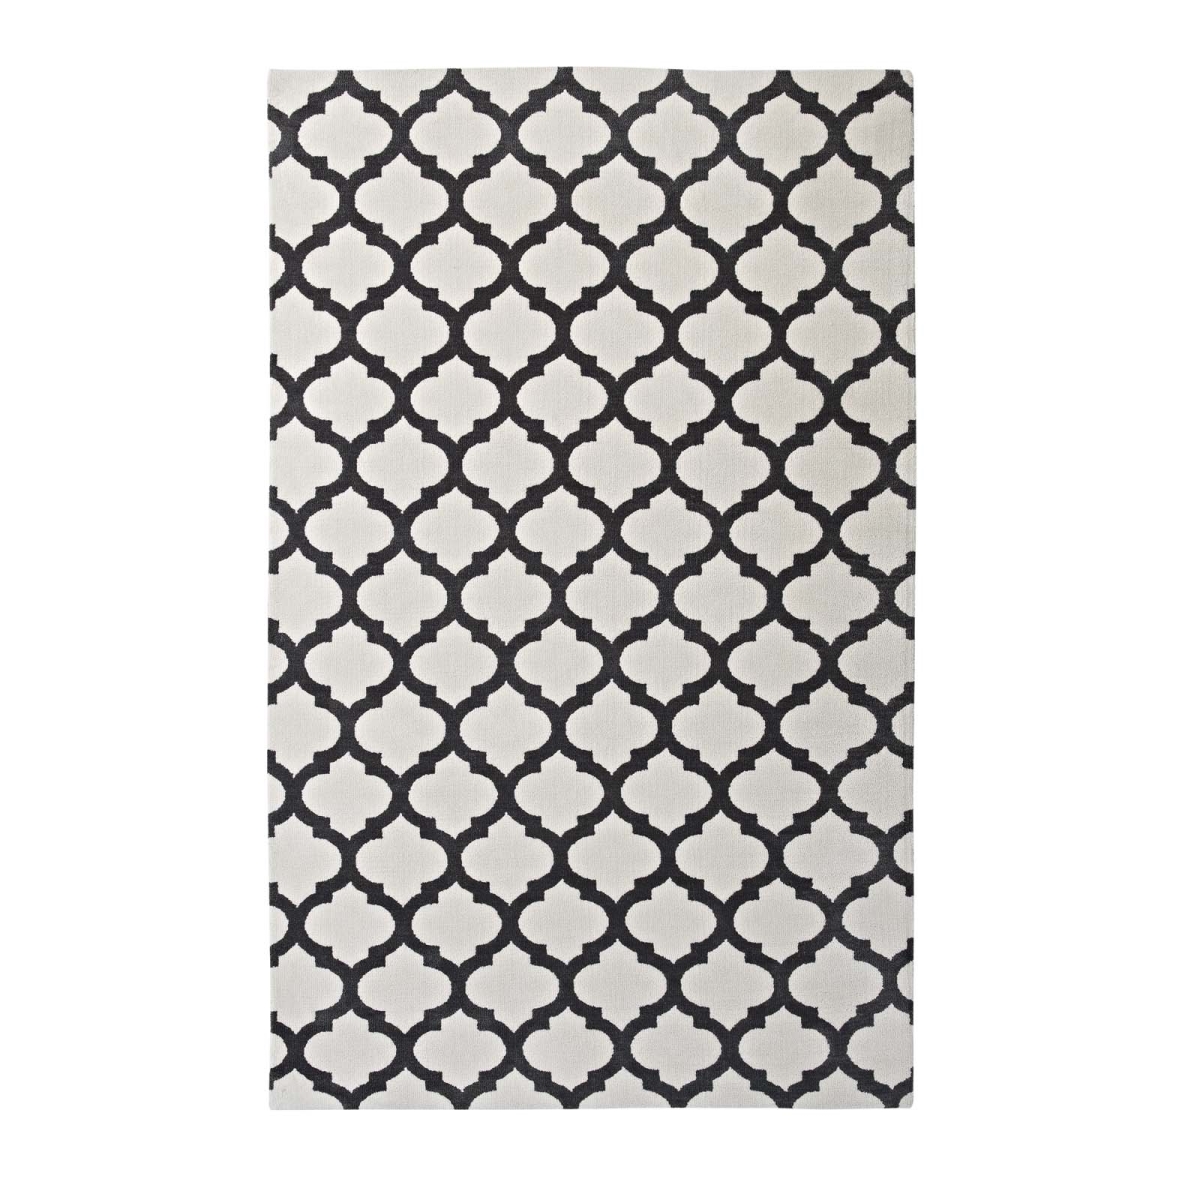 R-1001c-810 8 X 10 Ft. Lida Moroccan Trellis Polyester Area Rug - Ivory & Charcoal, 0.5 X 96 X 120 In.